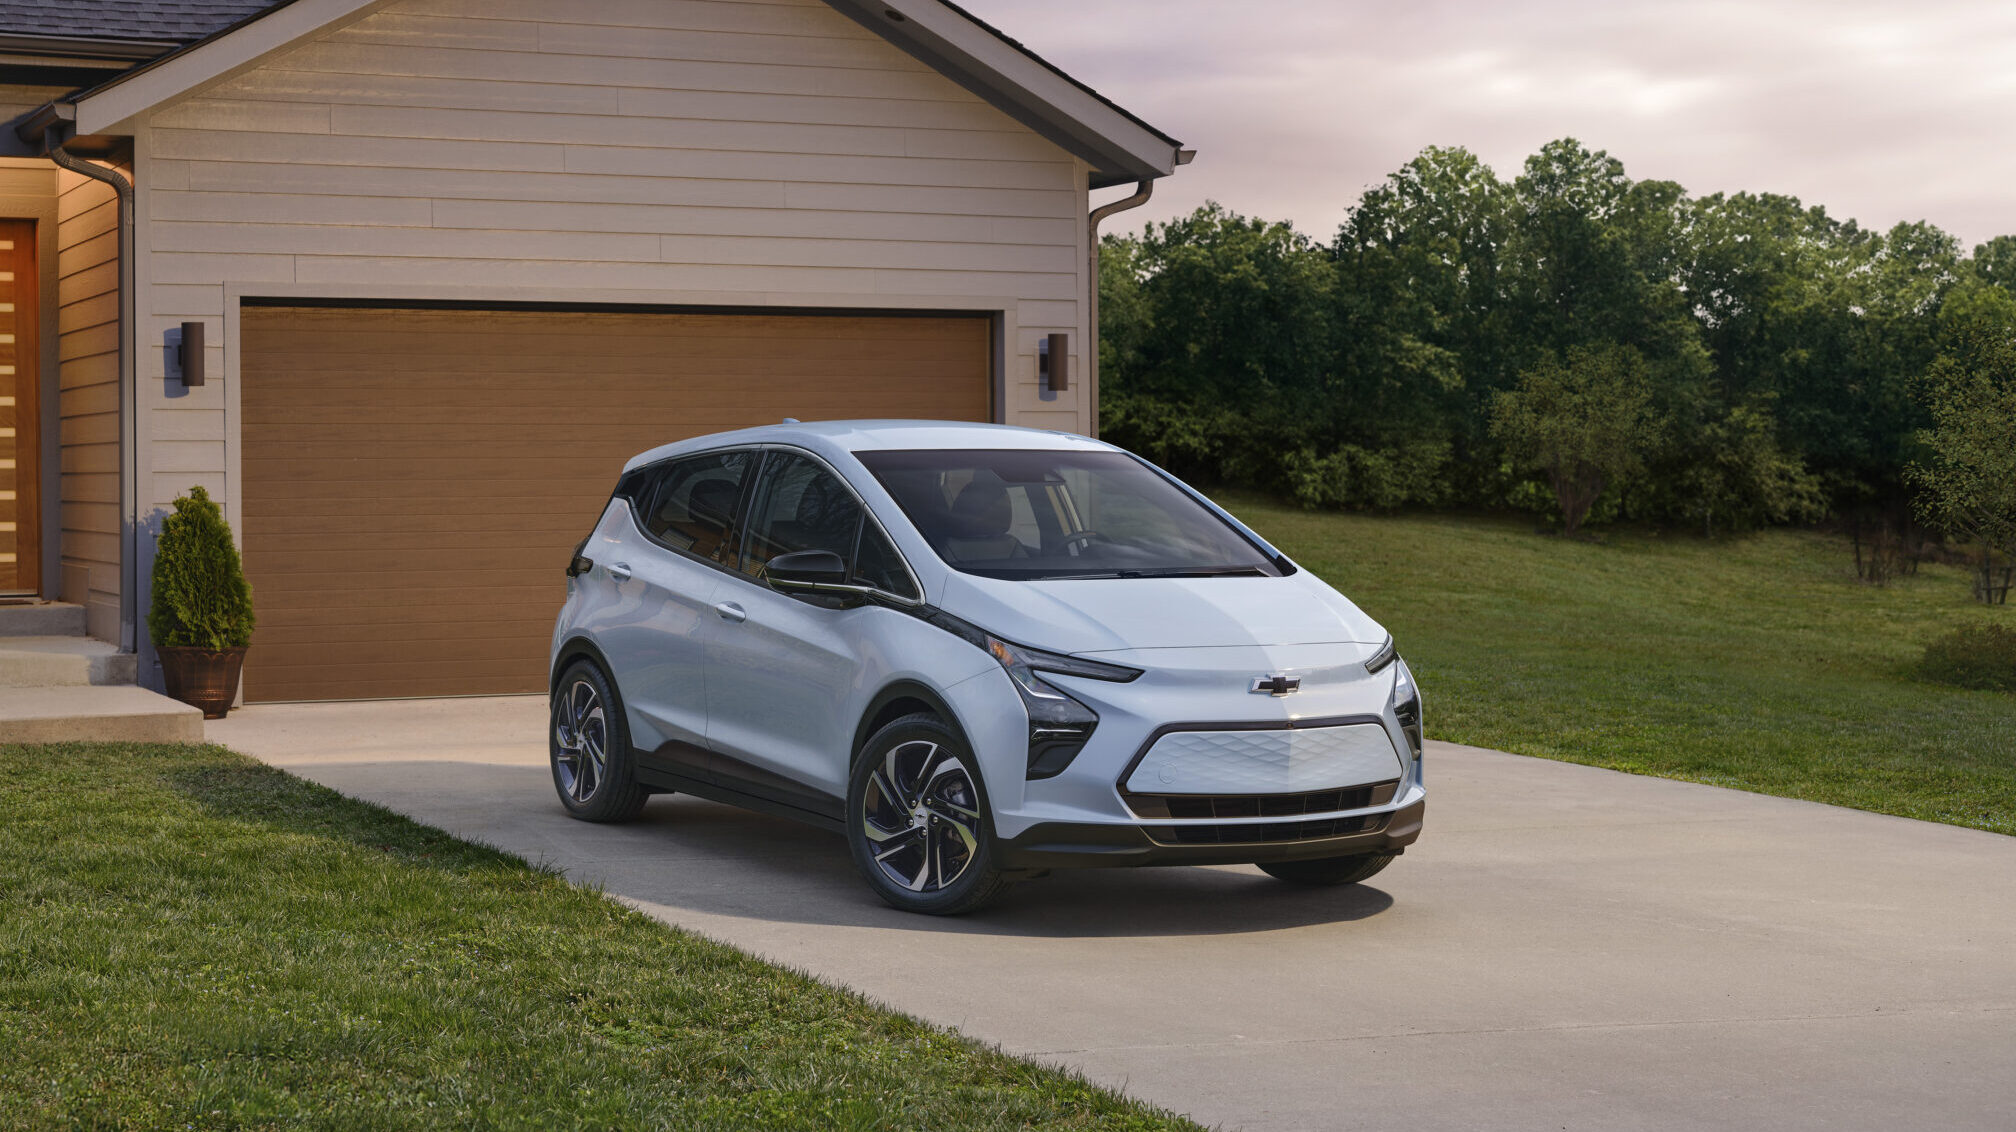 Electric Vehicles Topped 6 Percent of All US Car Sales in Q3